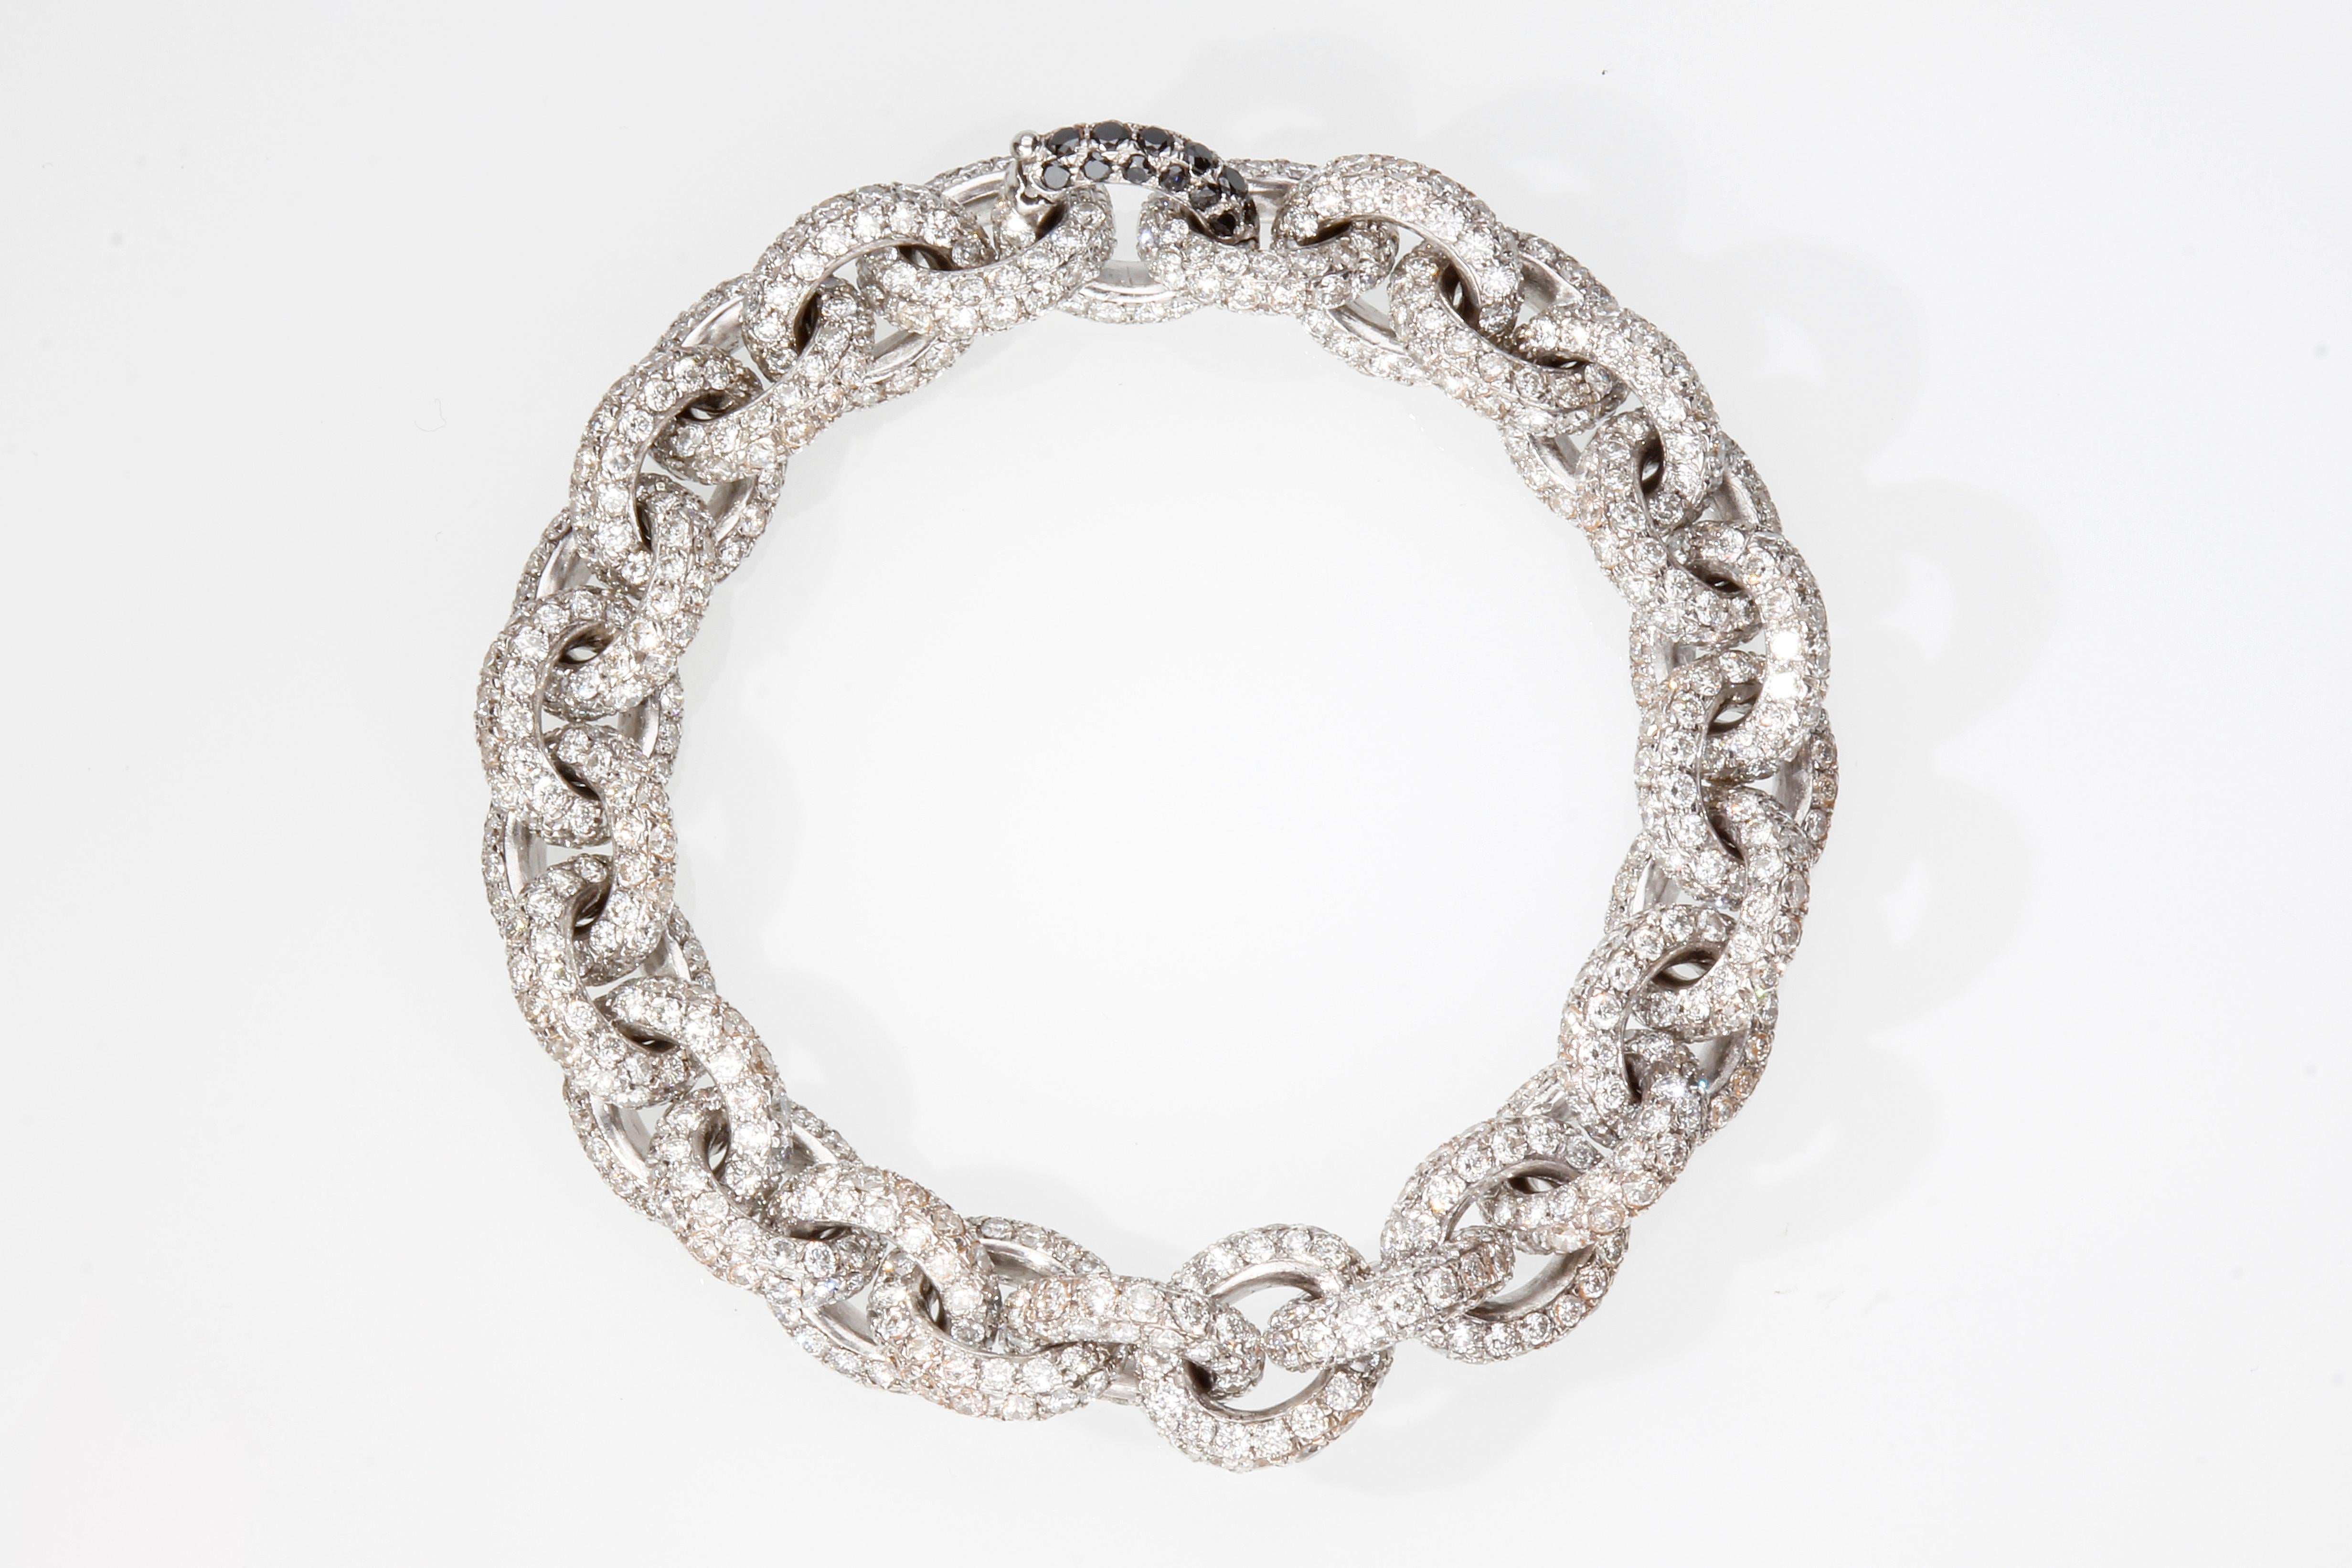 Modern Chain Bracelet with 30.76 Ct of White Diamonds. Handmade. Made in Italy For Sale